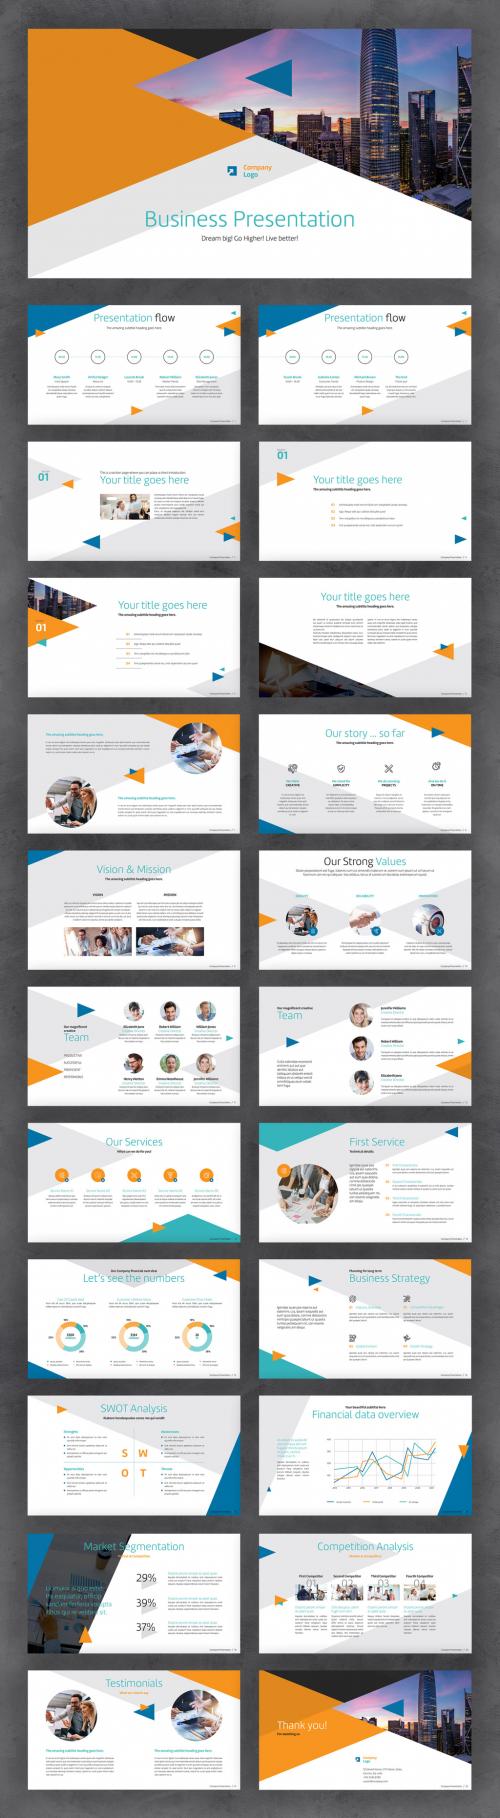 Business Presentation with Orange and Blue Accents - 431770017